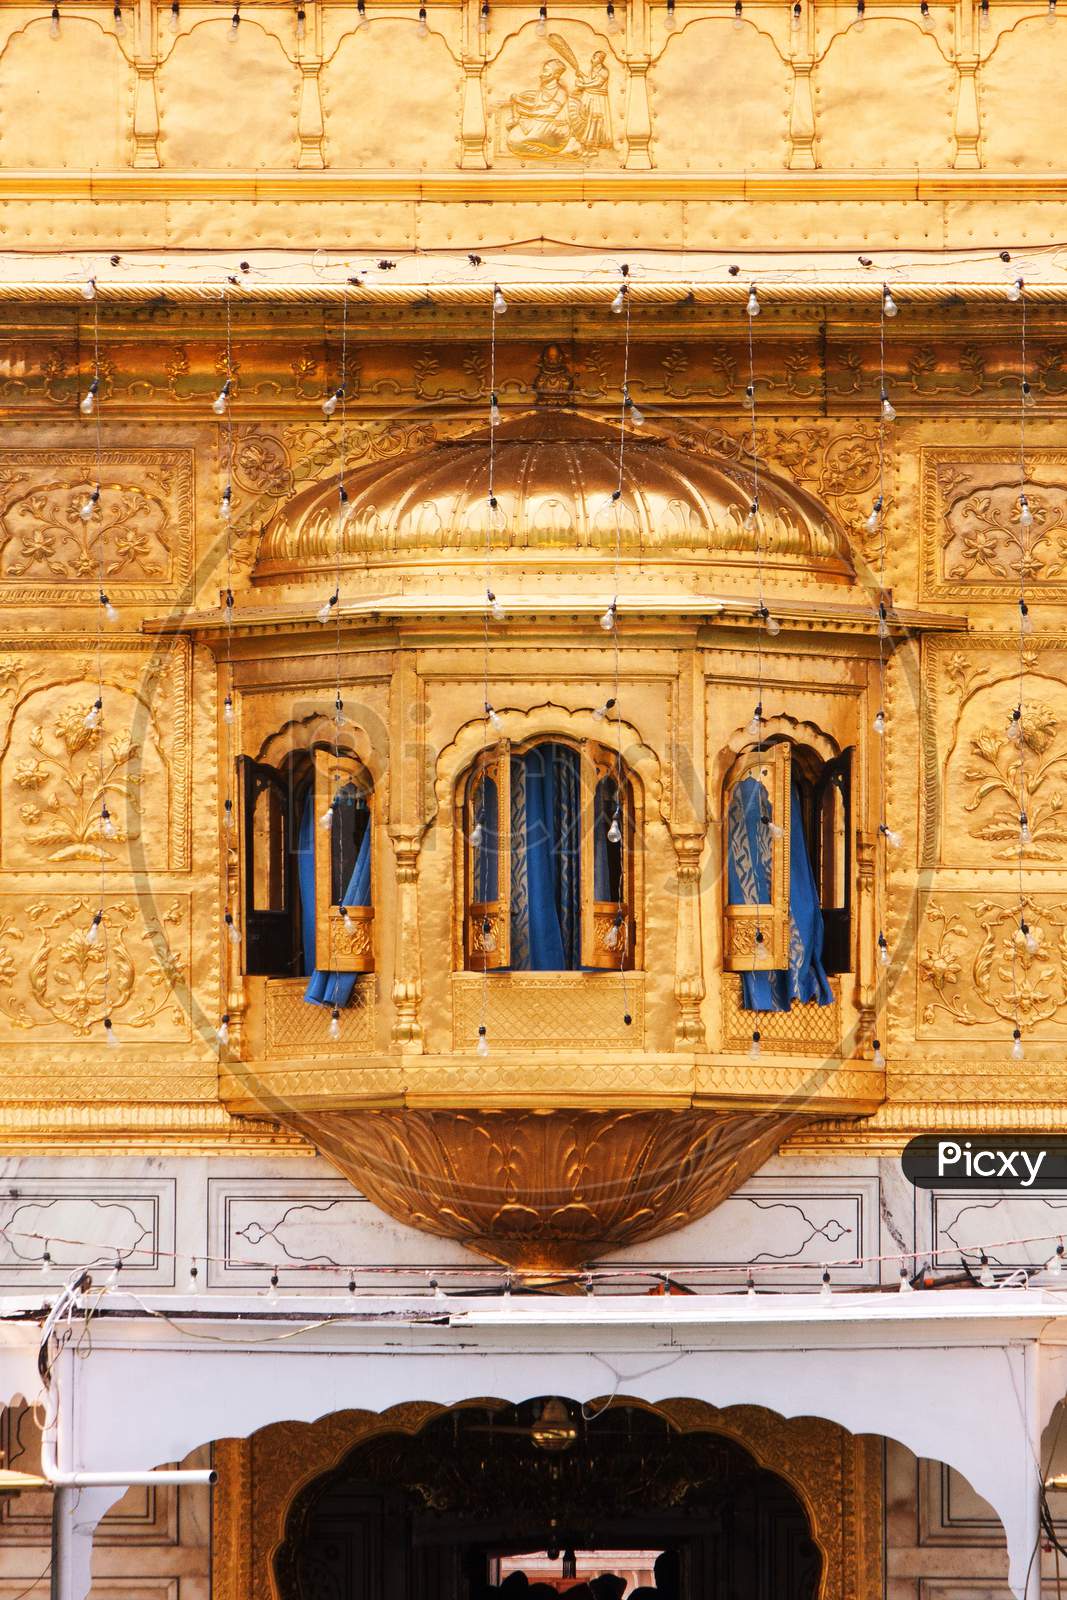 Window from eastern side of the Golden Temple